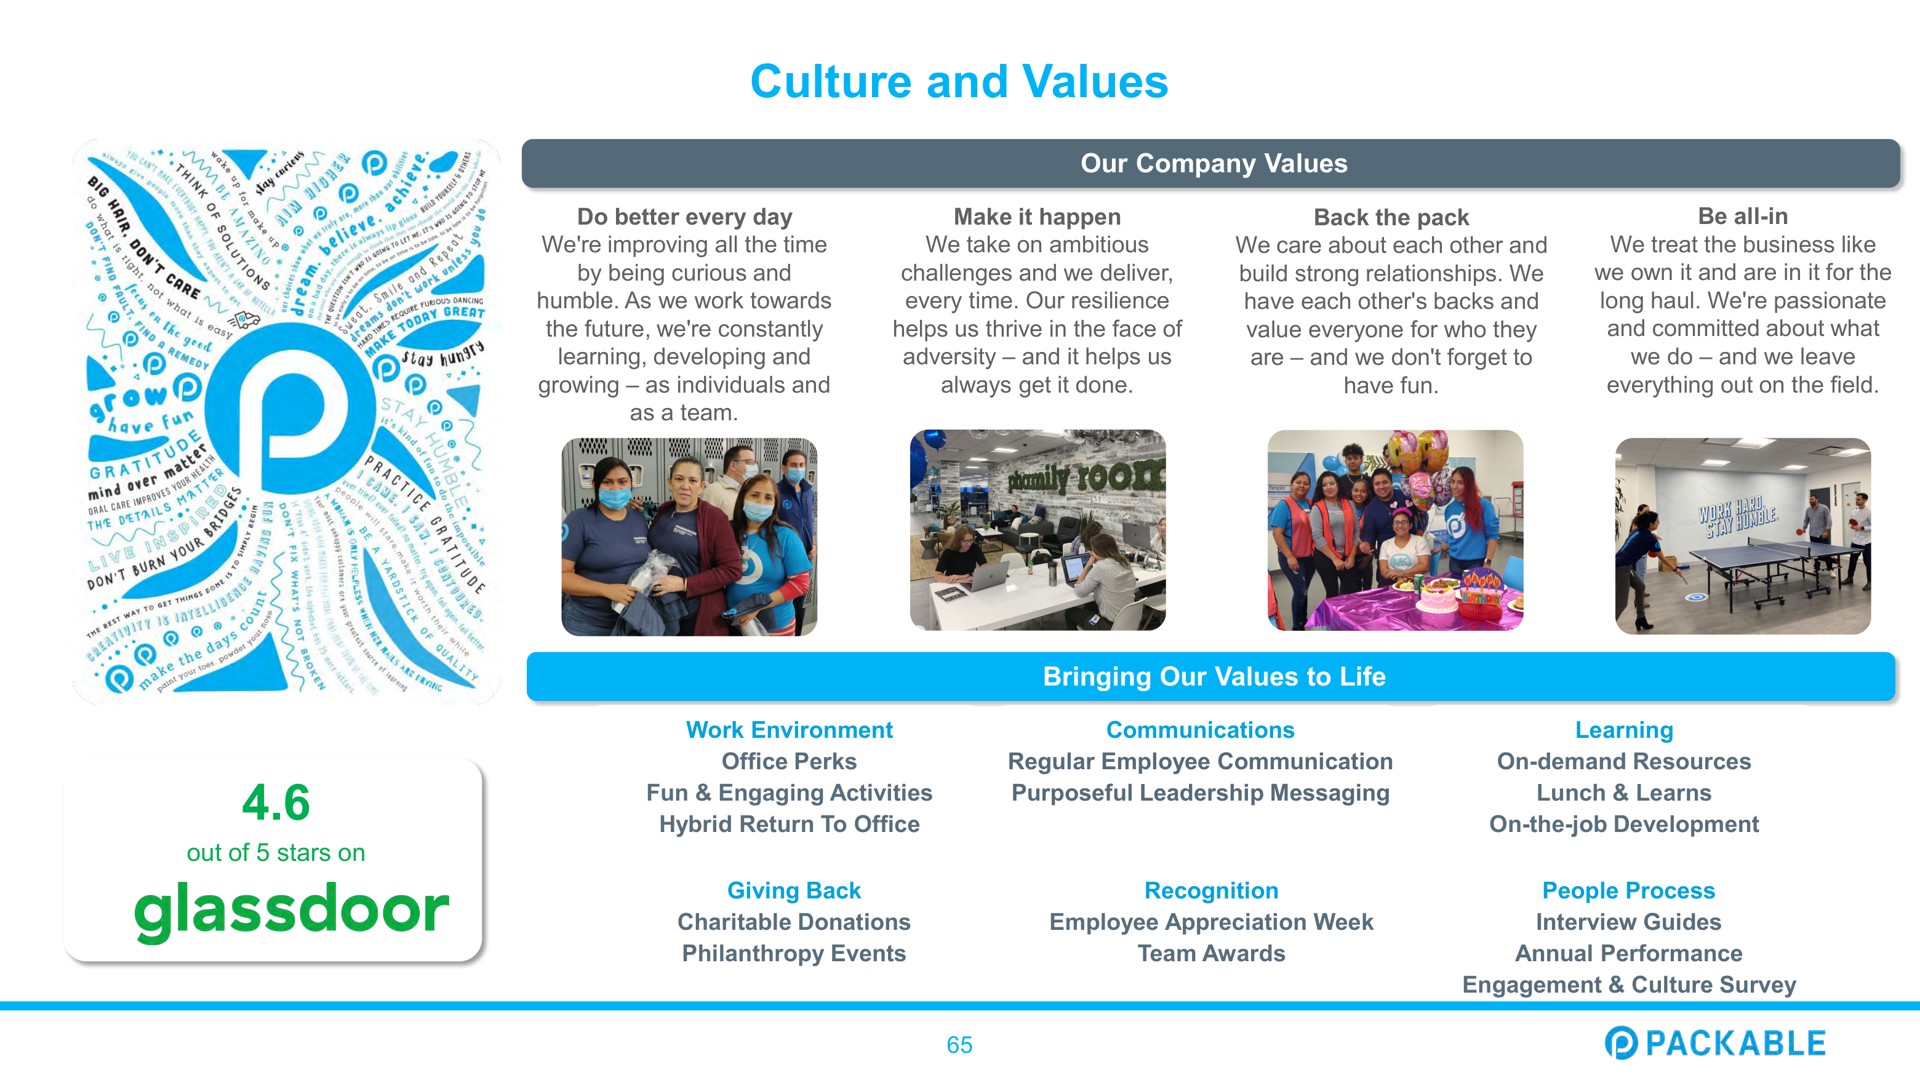 culture and values | Packable